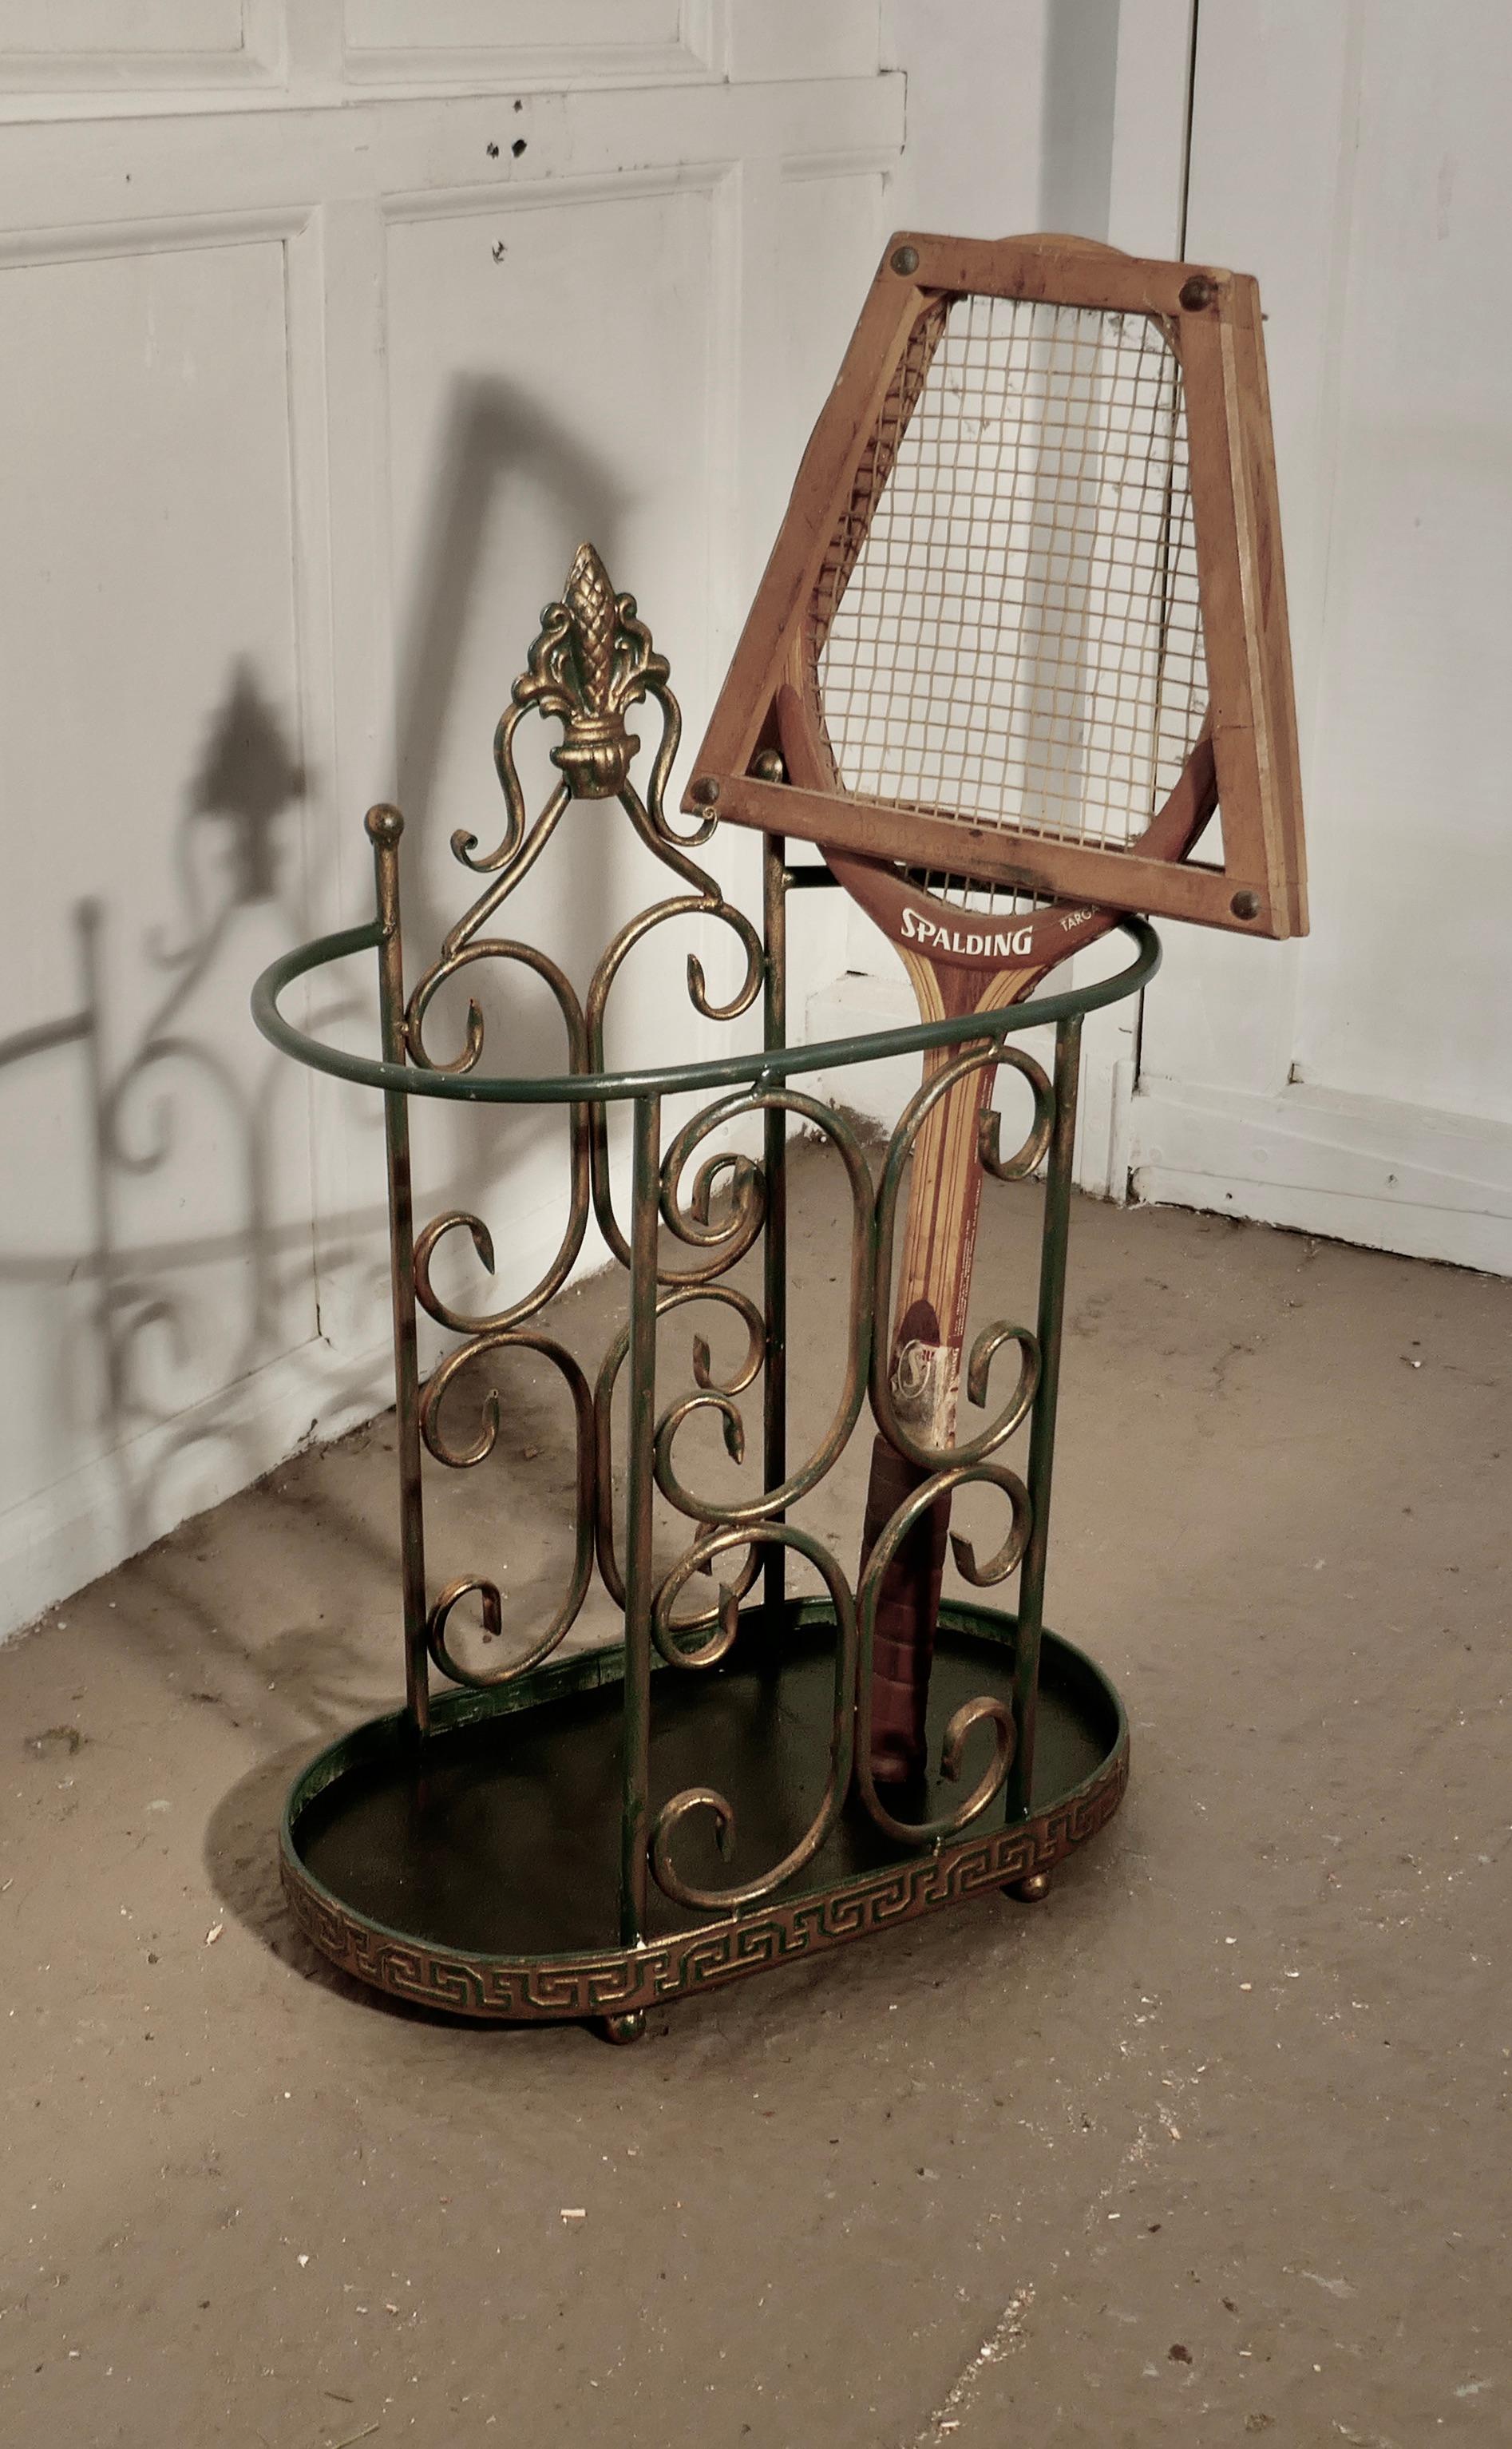 Roomy half round wirework stick stand or umbrella stand

A charming piece, and it has a very unusual half moon shape, the stand has green and gilt painted decoration and will hold both walking sticks and umbrellas
The stand is 23” high, 16” wide